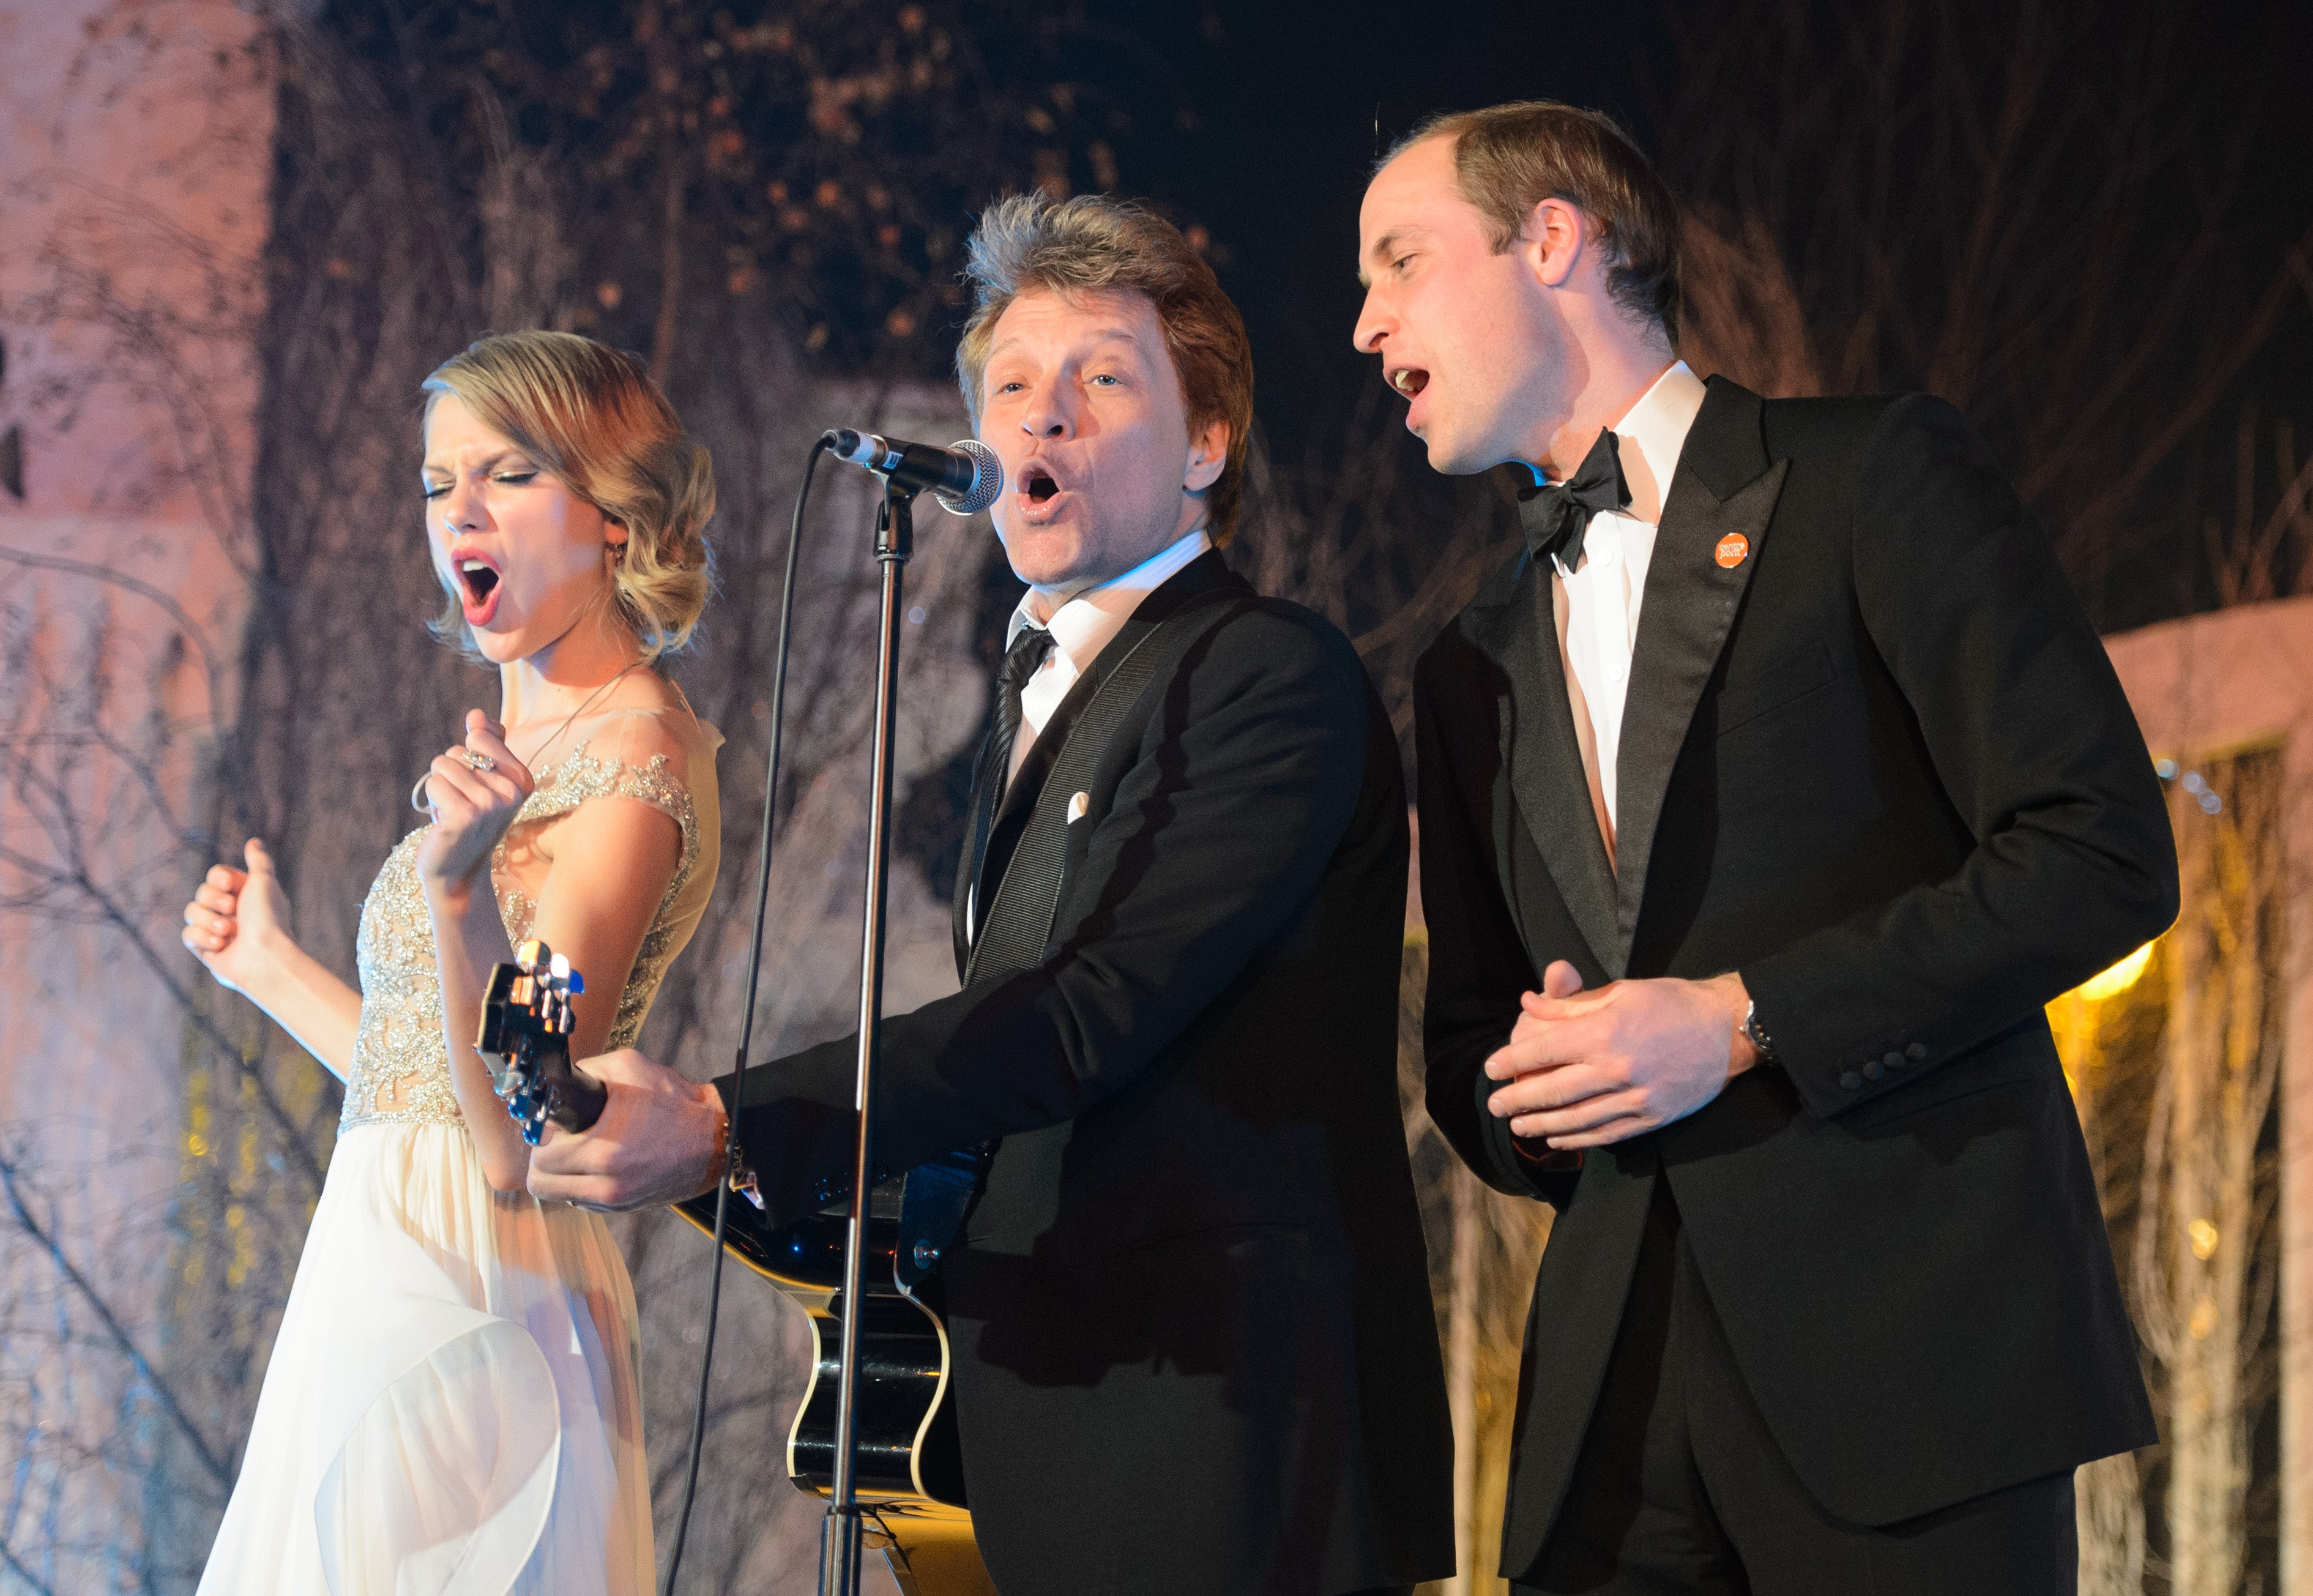 Taylor Swift, Jon Bon Jovi and Prince William on stage at Kensington Palace in London in 2013